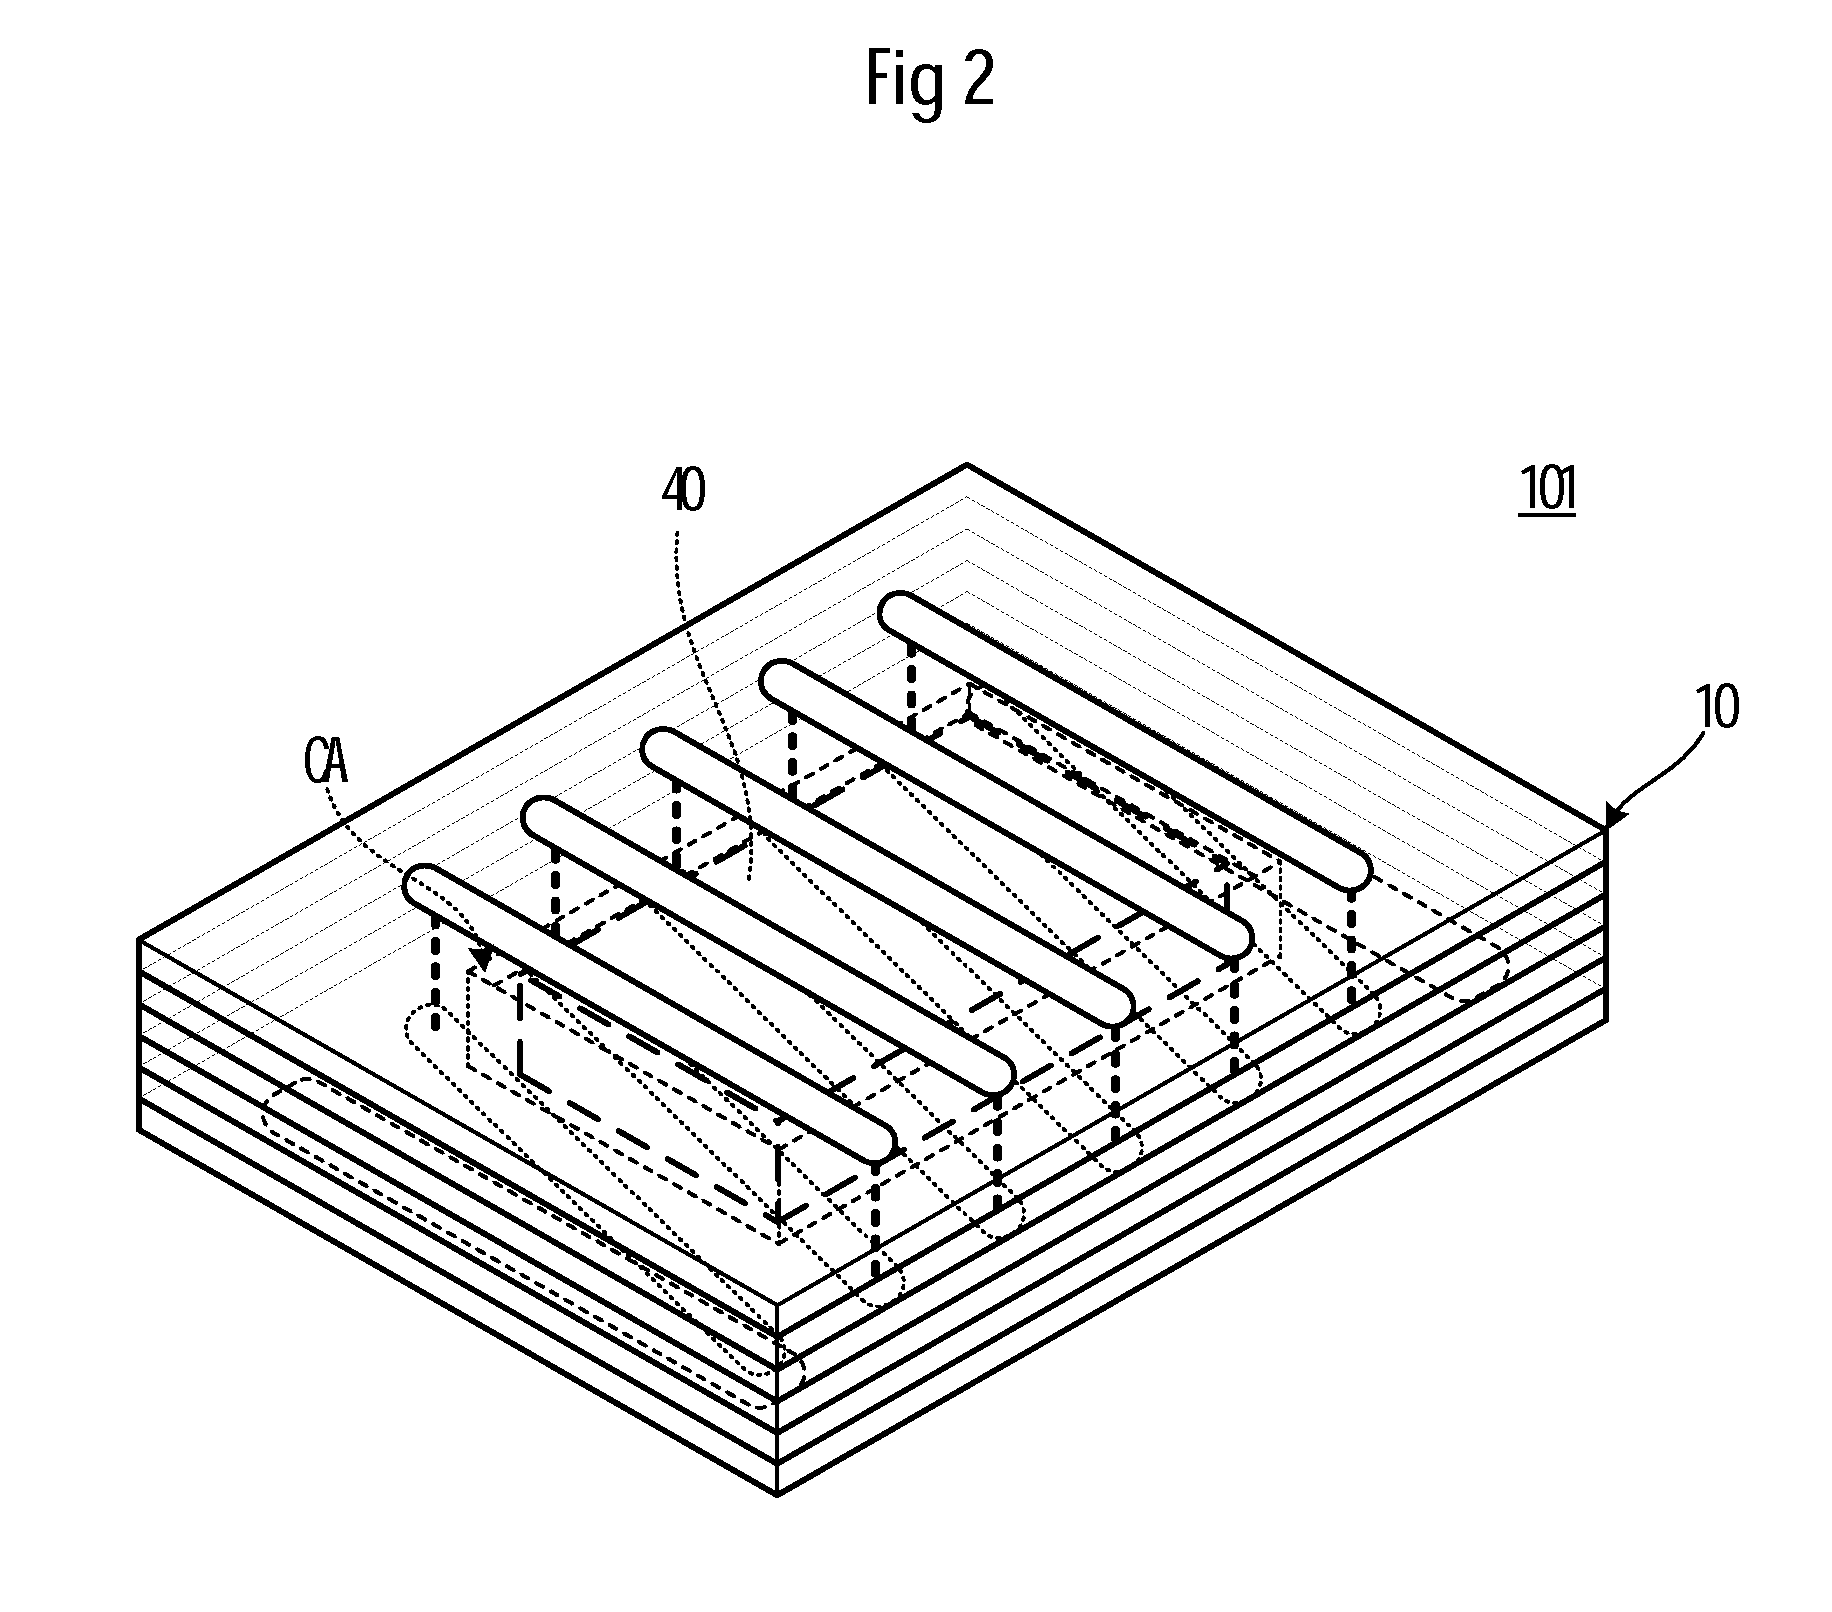 Antenna device, wireless communication device, and method of manufacturing antenna device